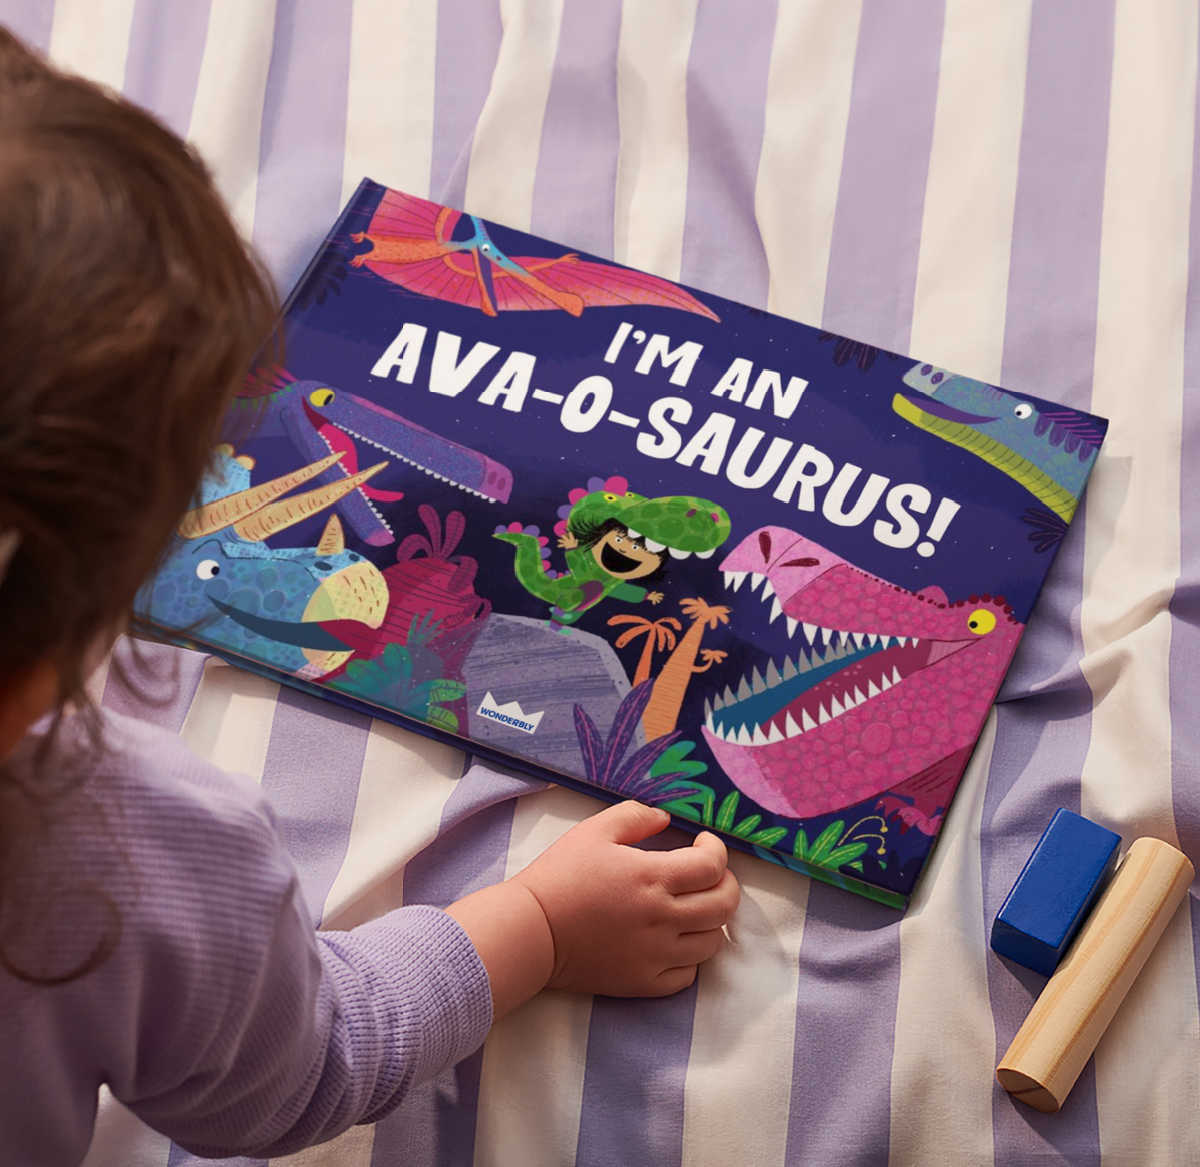 Wonderbly personalized books are the perfect gift for any child, on any holiday or occasion. They're easy to create, easy to order, and easy to love.